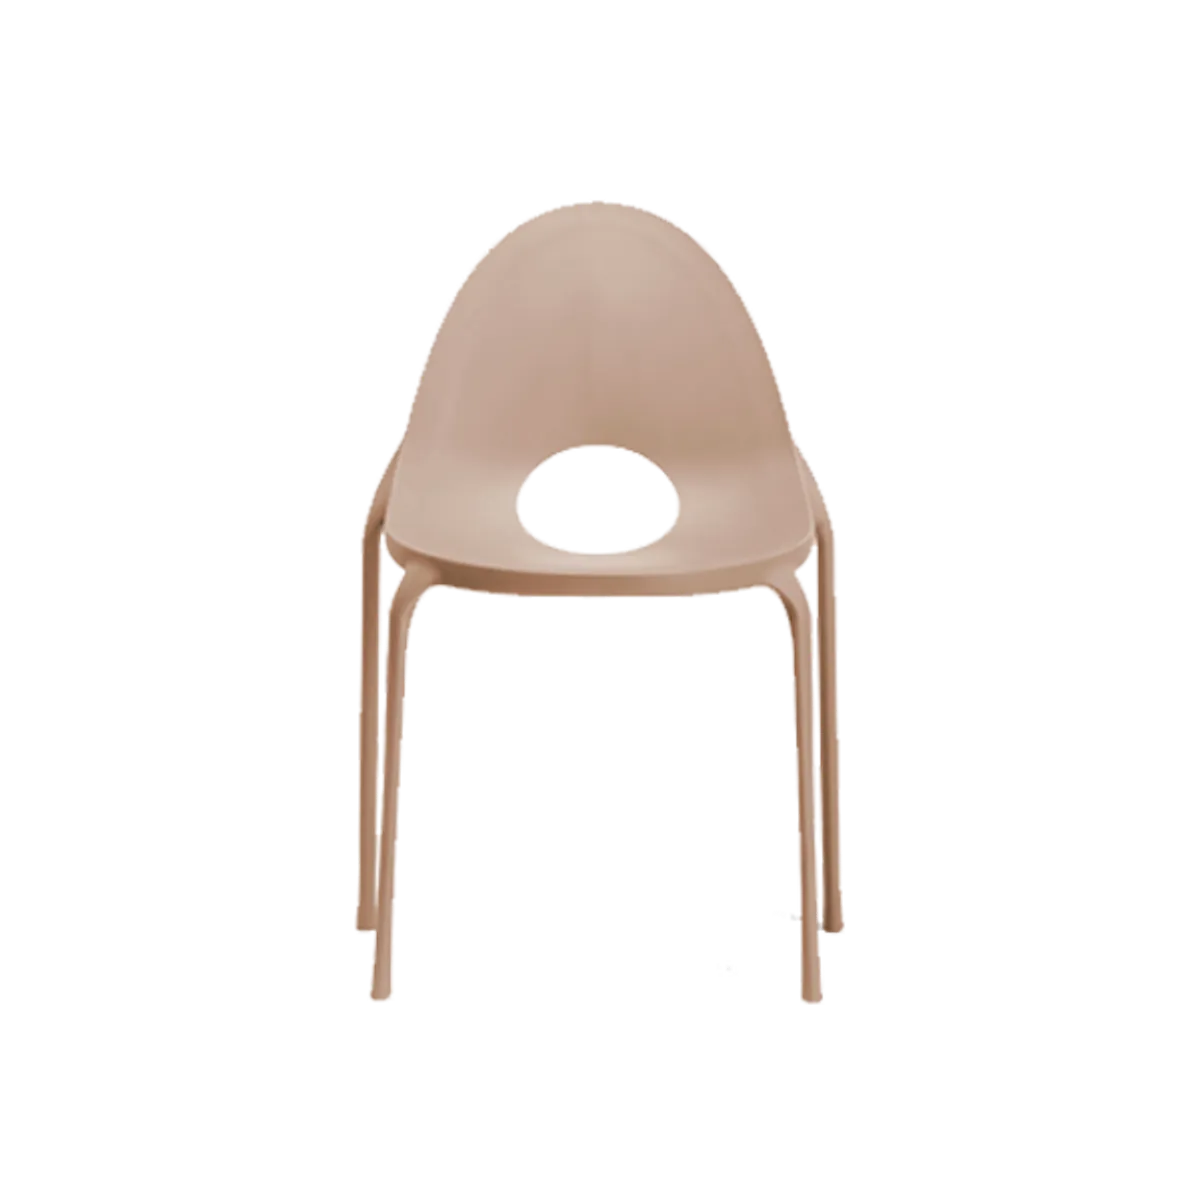 Droplet Childrens Chair Inside Out Contracts